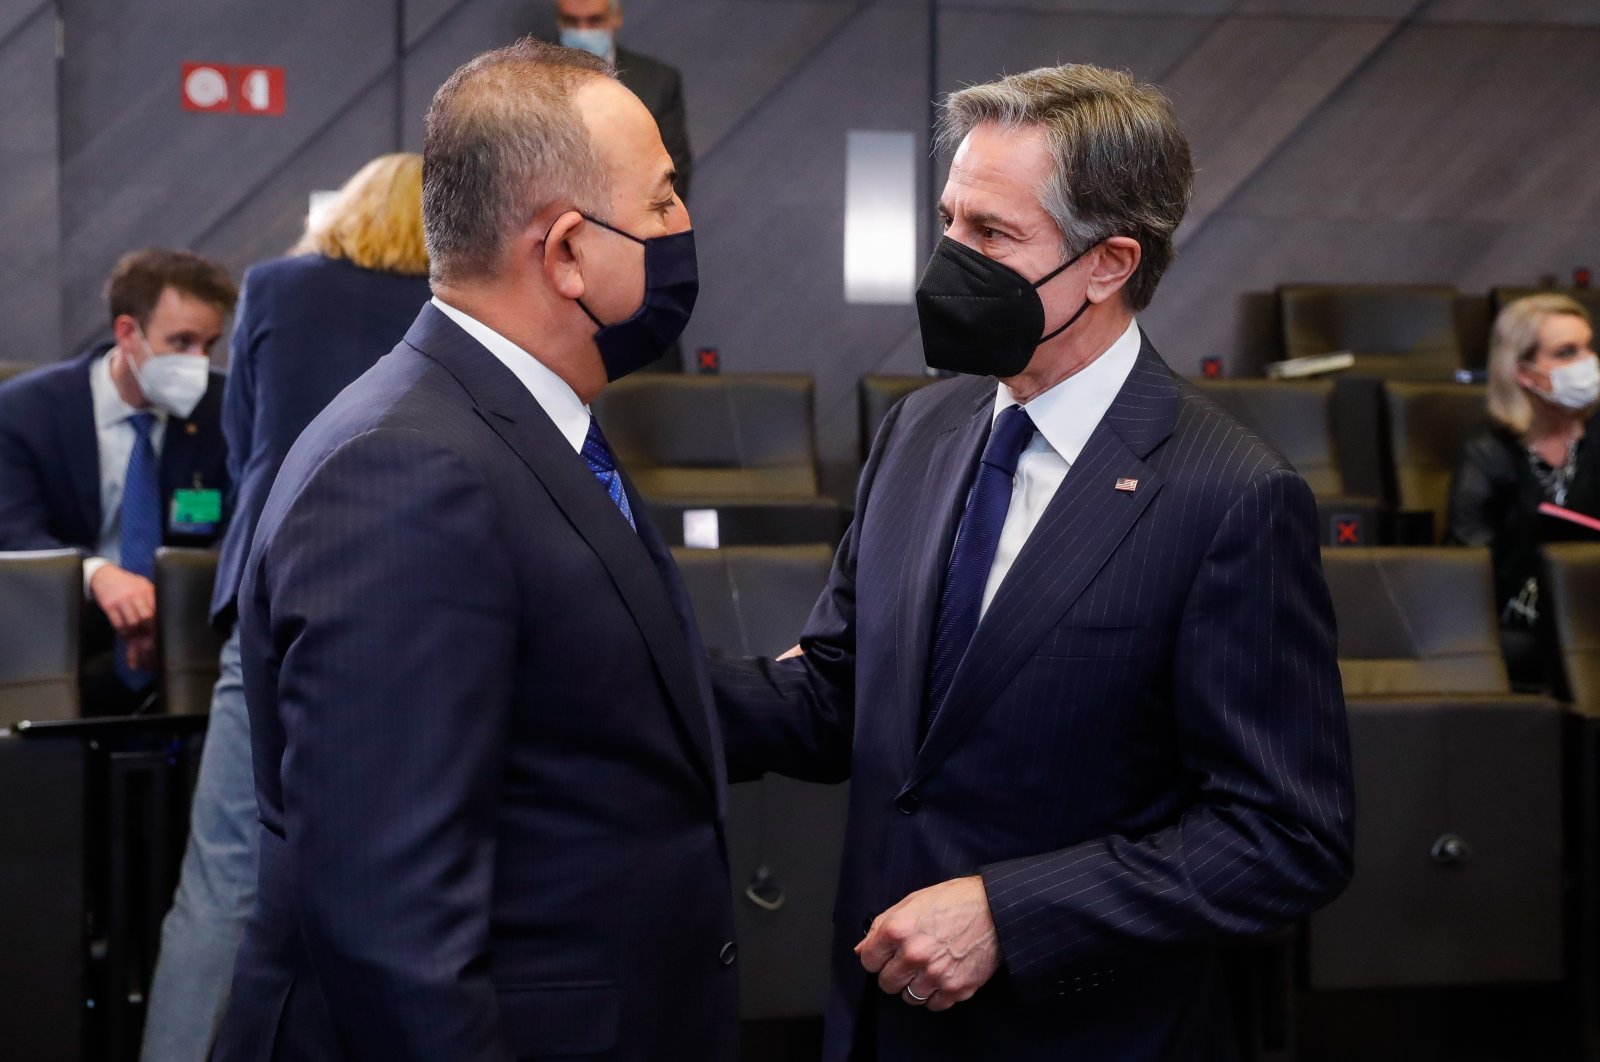 Foreign Minister Mevlüt Çavuşoğlu (L) and U.S. Secretary of State Antony Blinken at the start of an extraordinary meeting of NATO Ministers of Foreign Affairs on the Russian aggression on Ukraine at the NATO headquarters in Brussels, Belgium, March 4, 2022.  (EPA Photo)